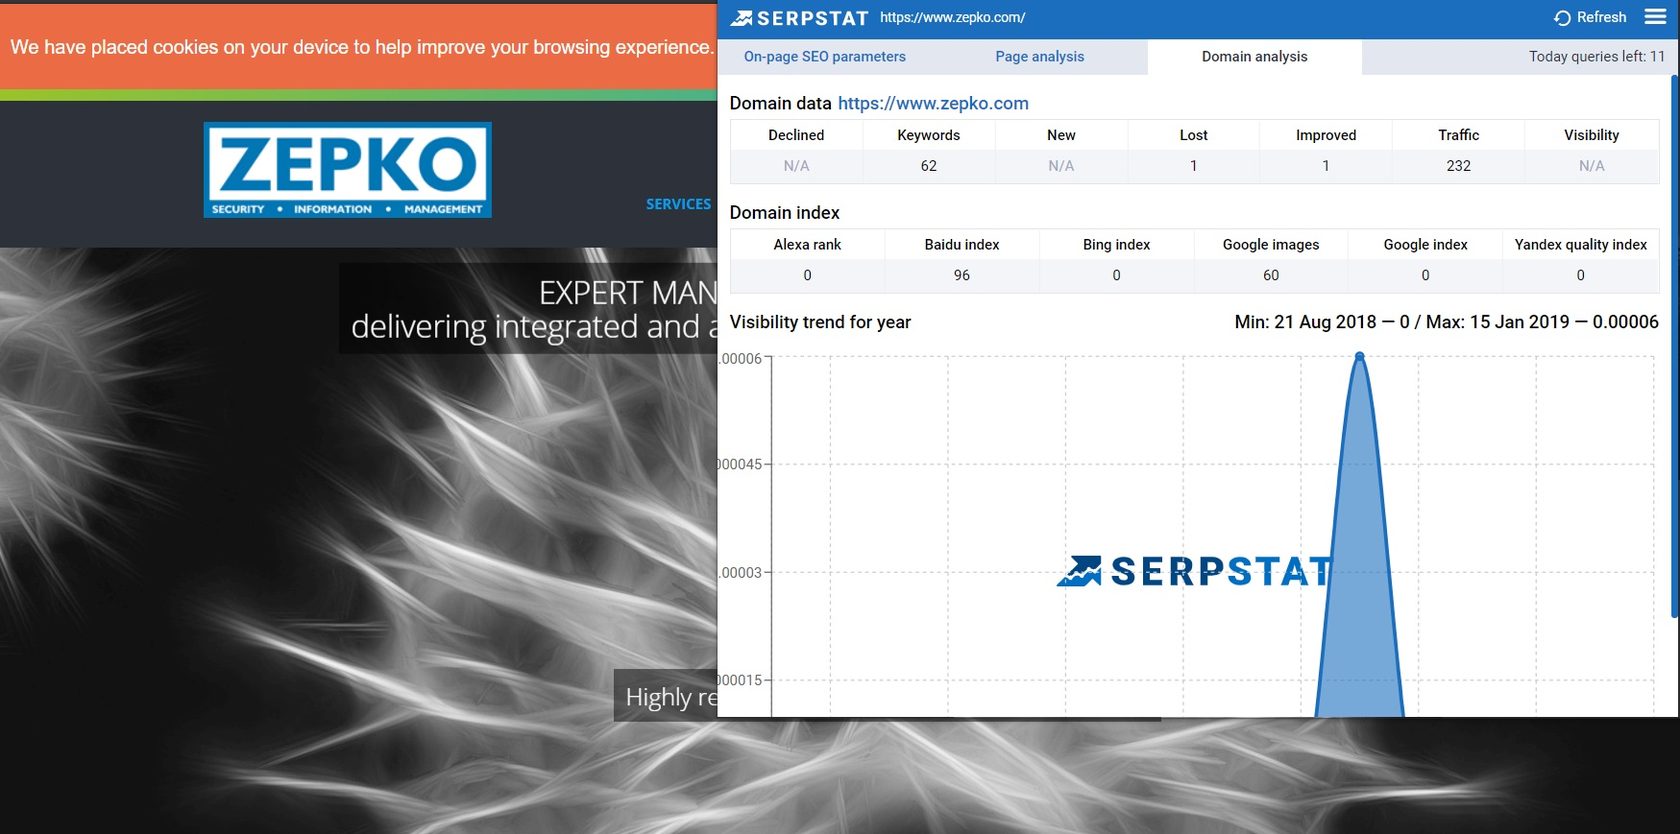 Belkins Case: How Serpstat Helps Us Find And Qualify Leads 16261788320513